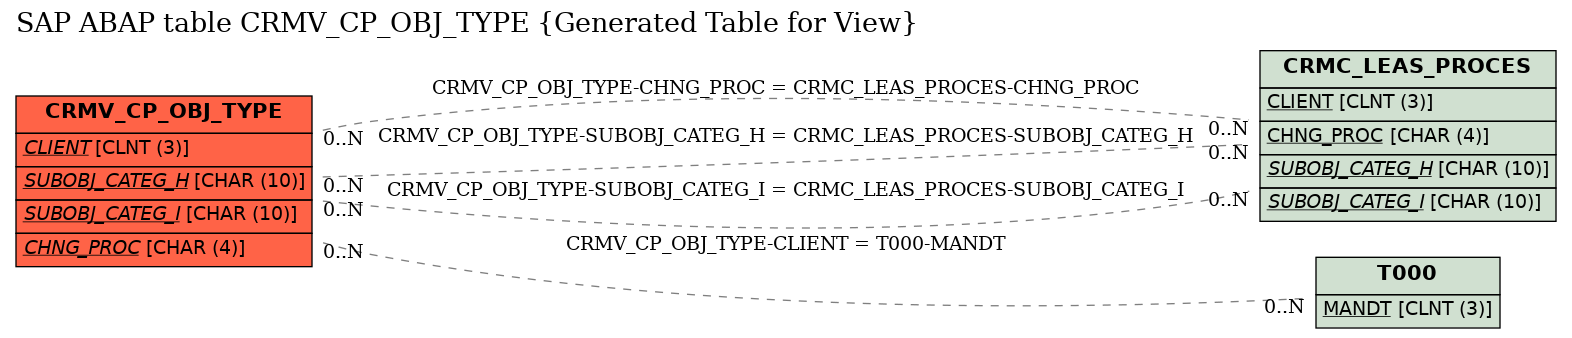 E-R Diagram for table CRMV_CP_OBJ_TYPE (Generated Table for View)